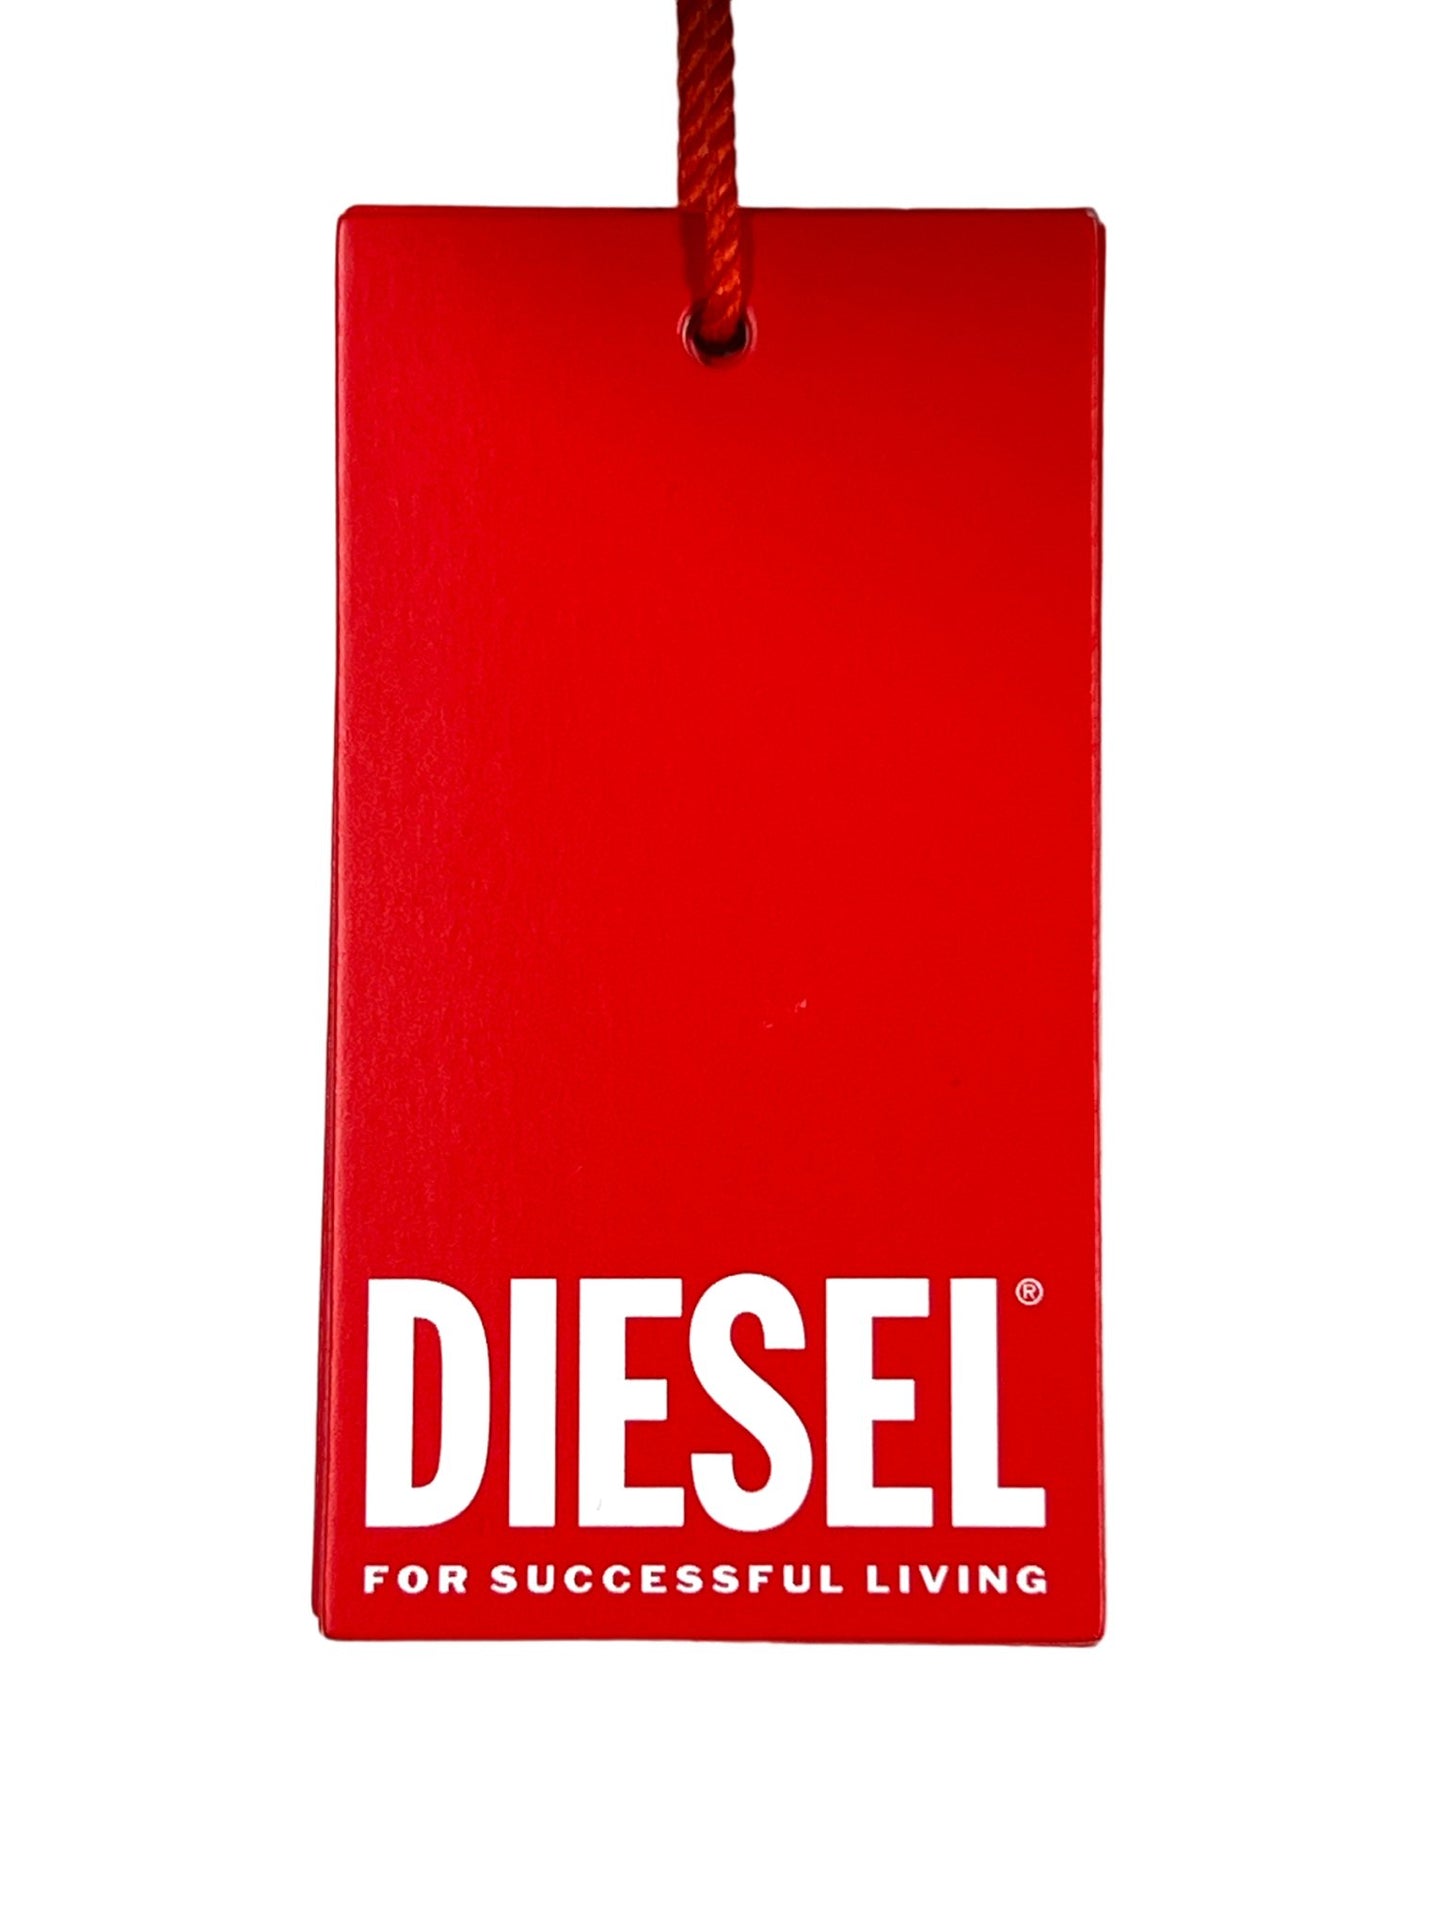 Red DIESEL T-BUXT-N3 graphic t-shirt brand tag with logo and slogan against a black background.